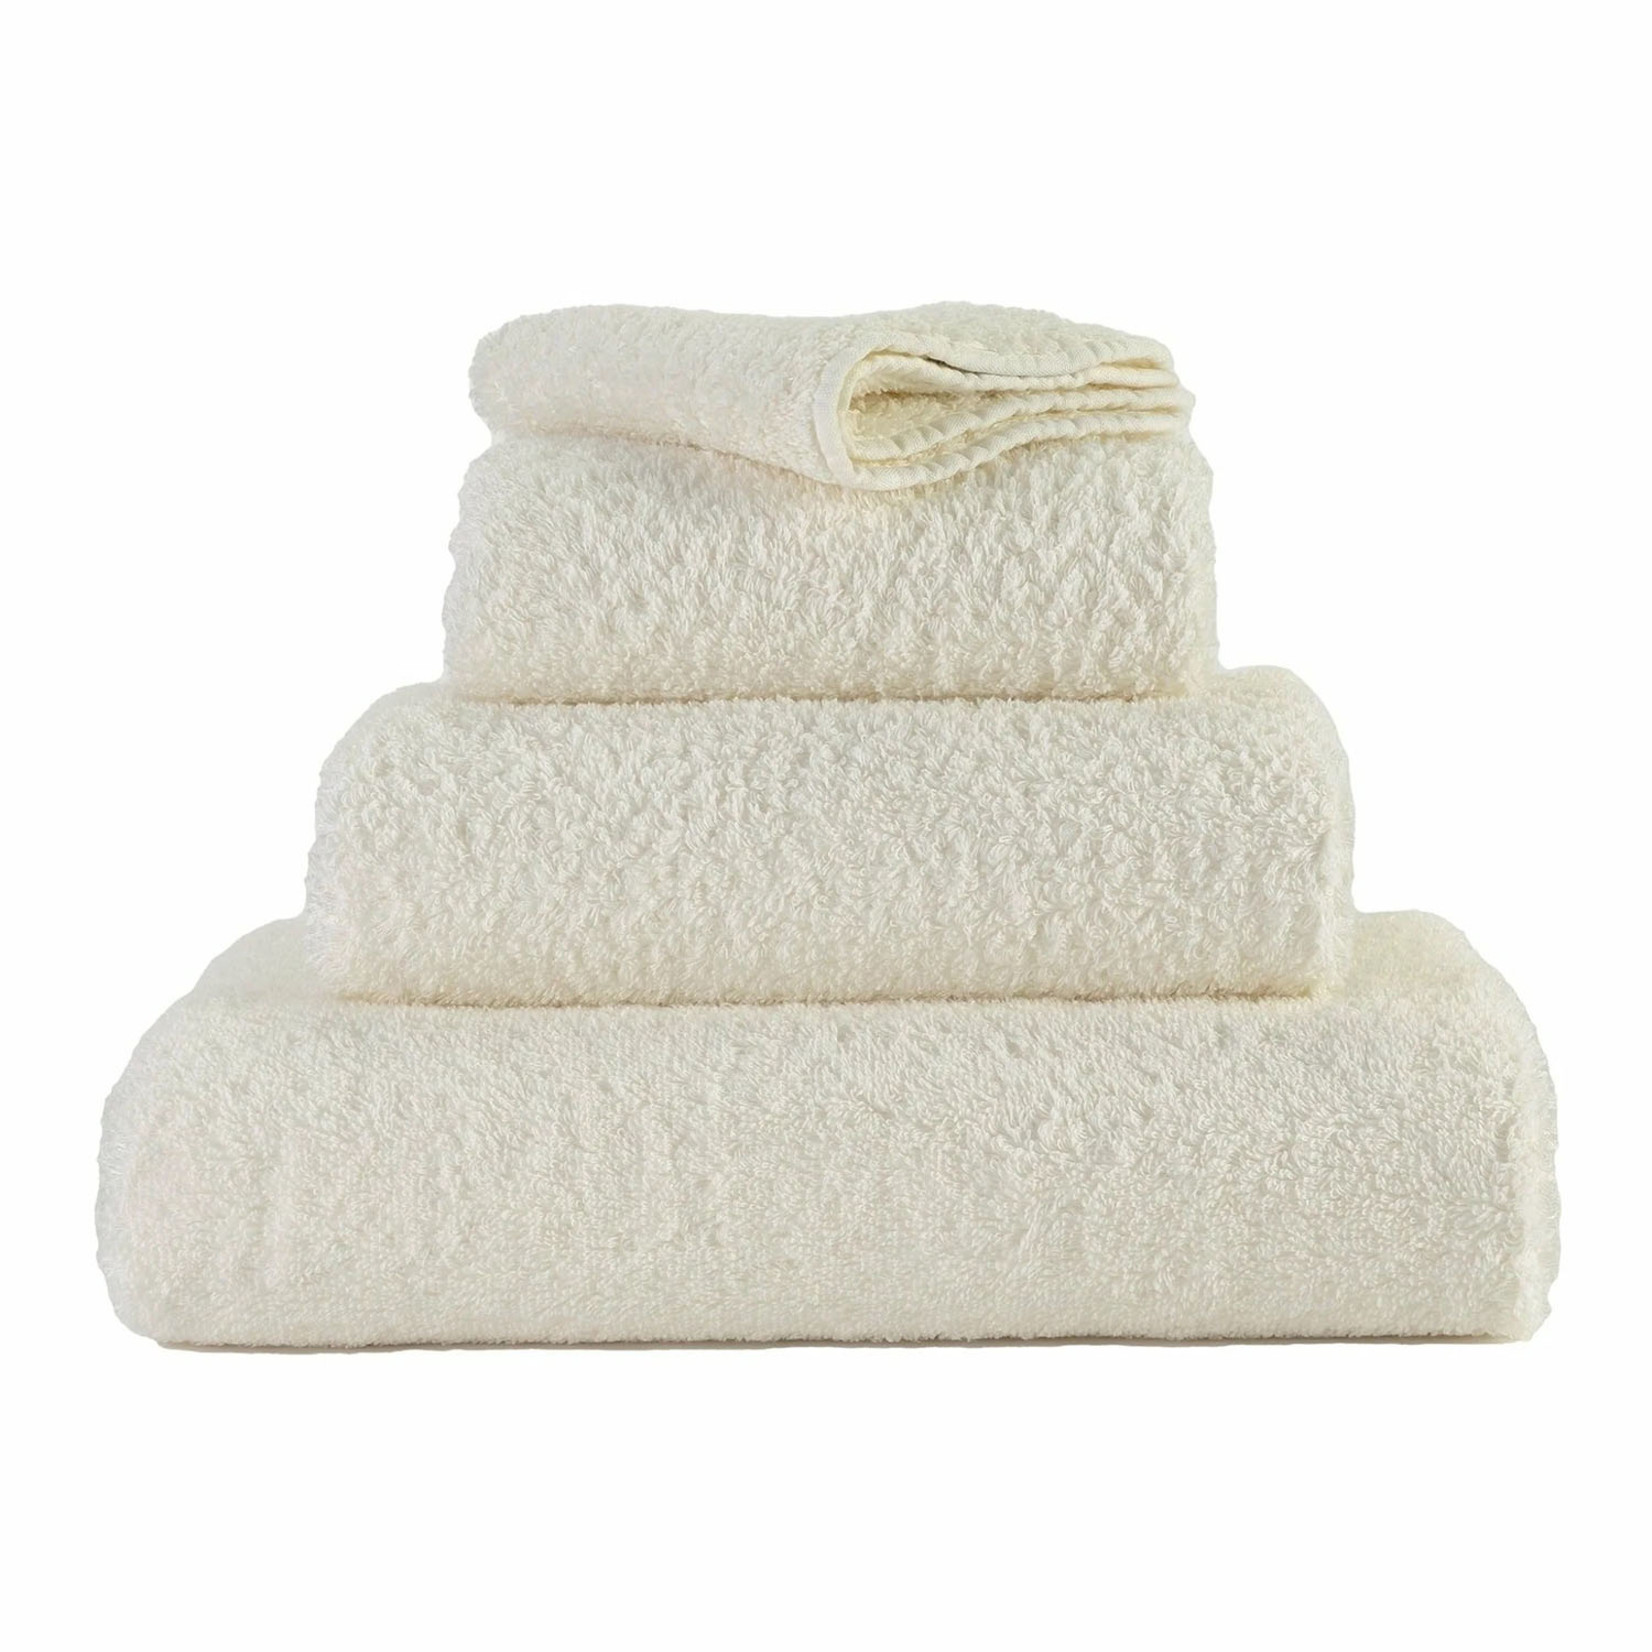 Abyss Abyss Super Pile Towel 103 Ivory